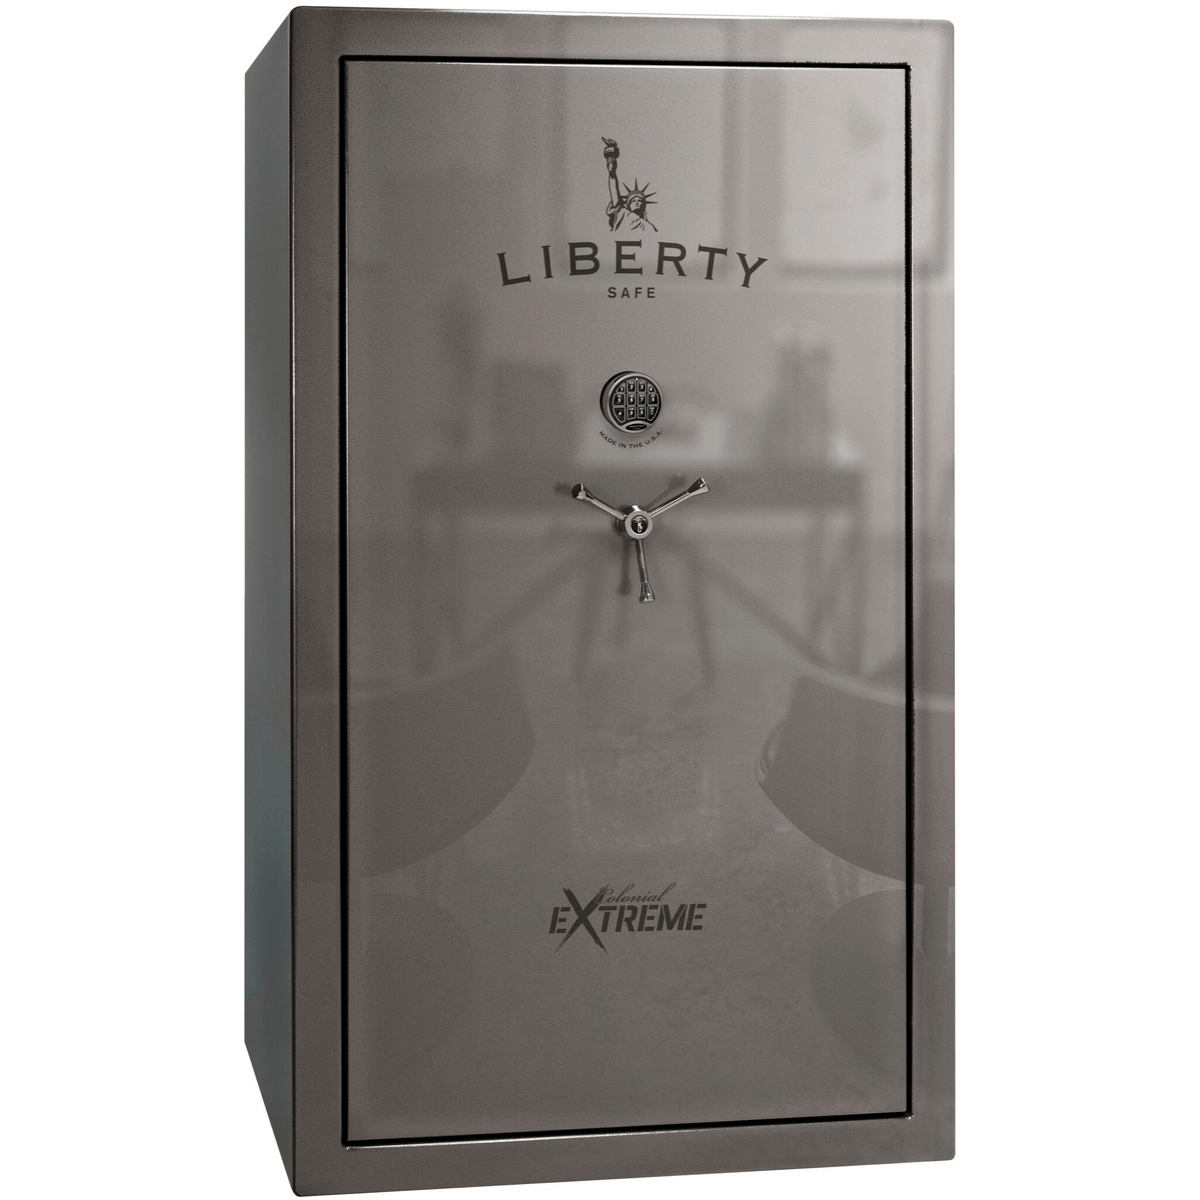 Liberty Colonial 50 Extreme Safe in Gray Gloss with Black Chrome Electronic Lock.